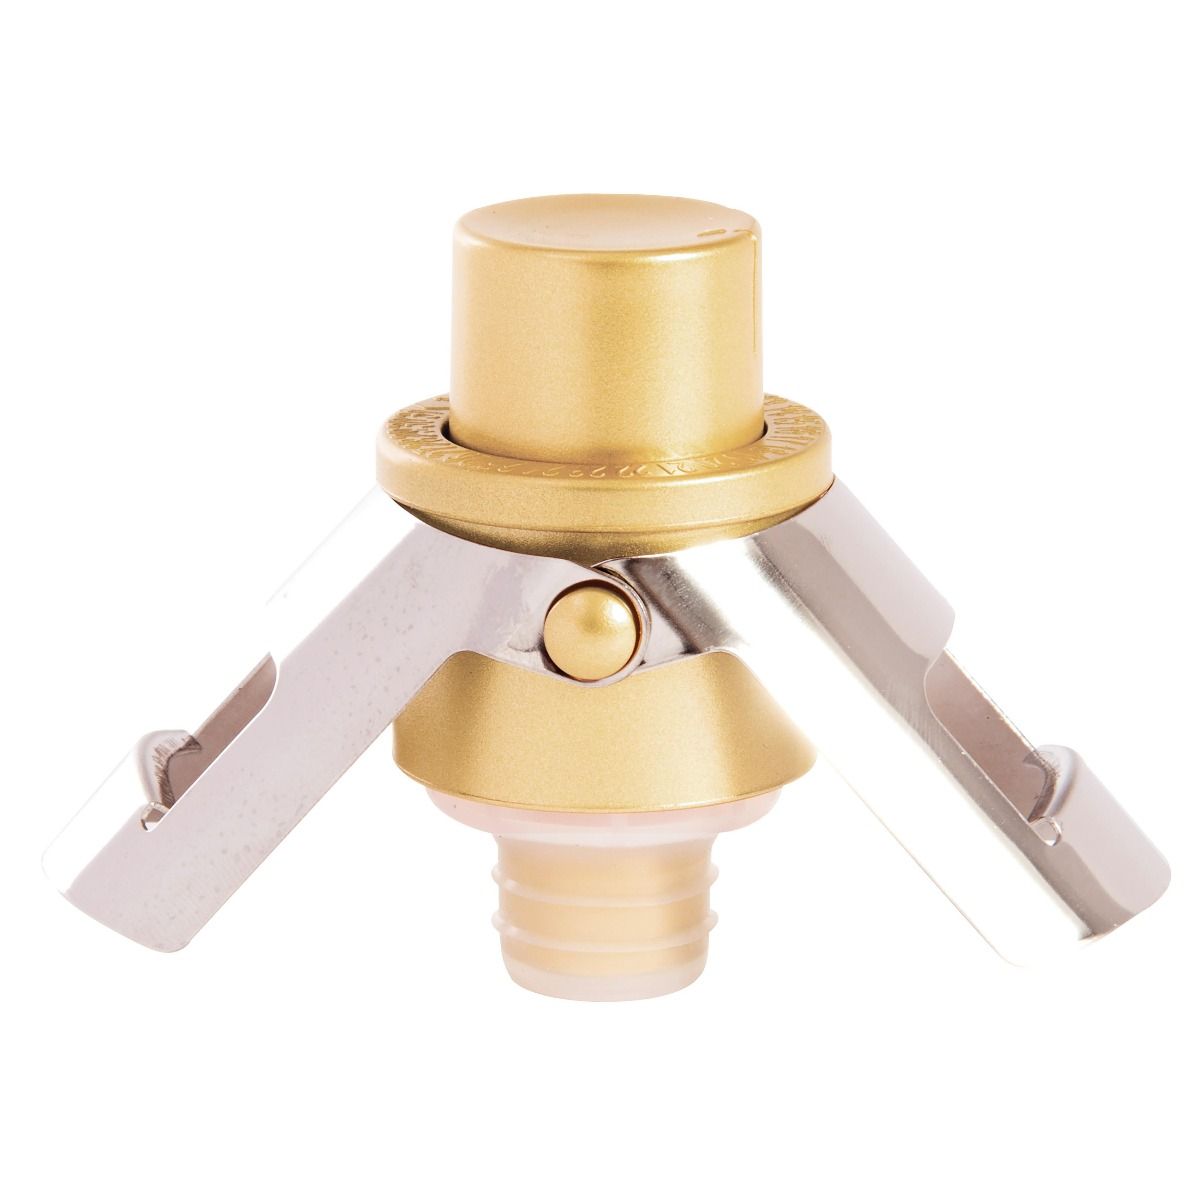 Pump It Up Champagne Stopper-Dining & Entertaining-IS Gift-The Bay Room